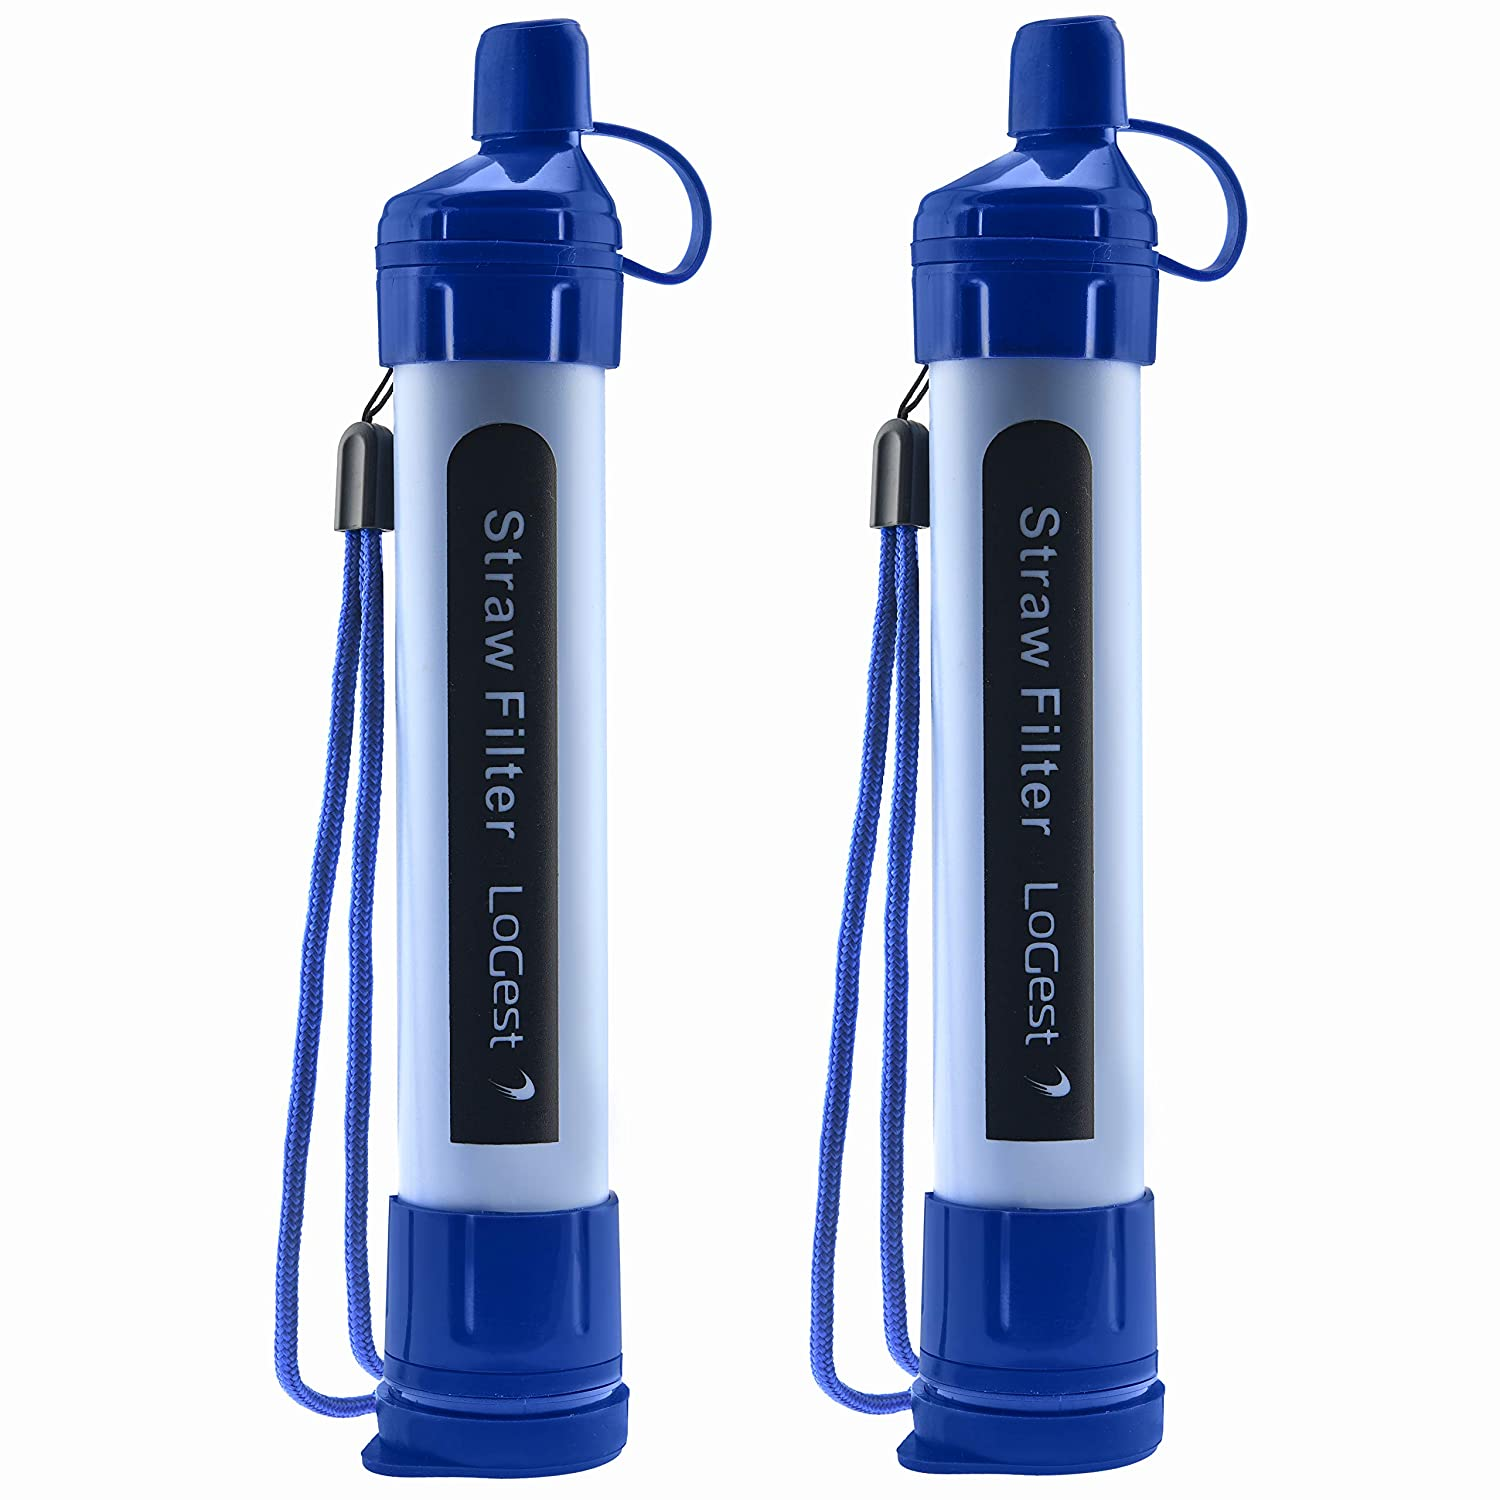 Suzicca Water Filter Straw 3-Stage Filtration Portable Gear for Drinking  Camping Hiking and Emergency Preparedness 